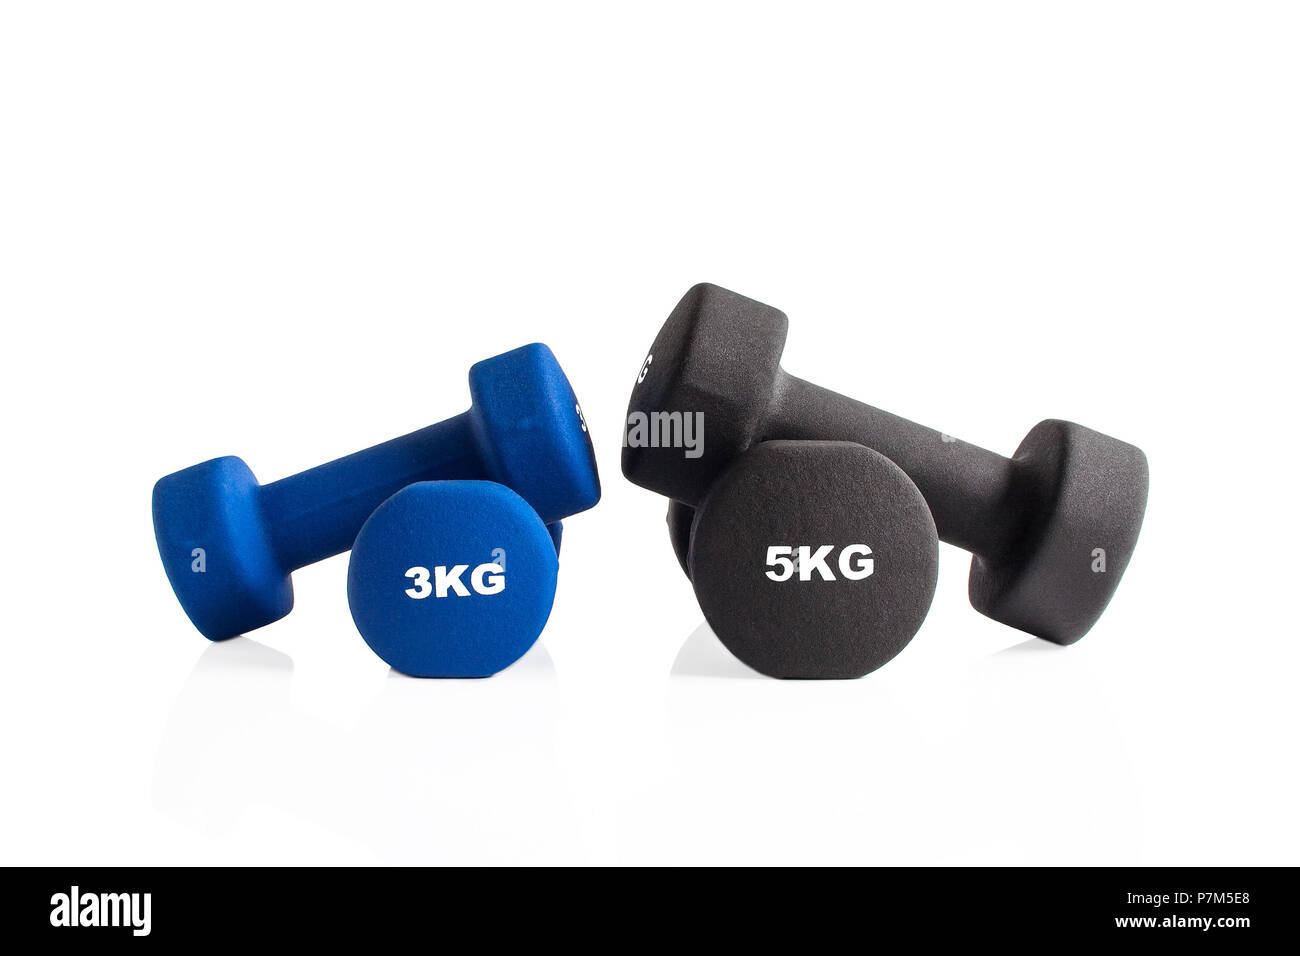 3kg and 5kg gym dumbbells isolated on a white background. Stock Photo